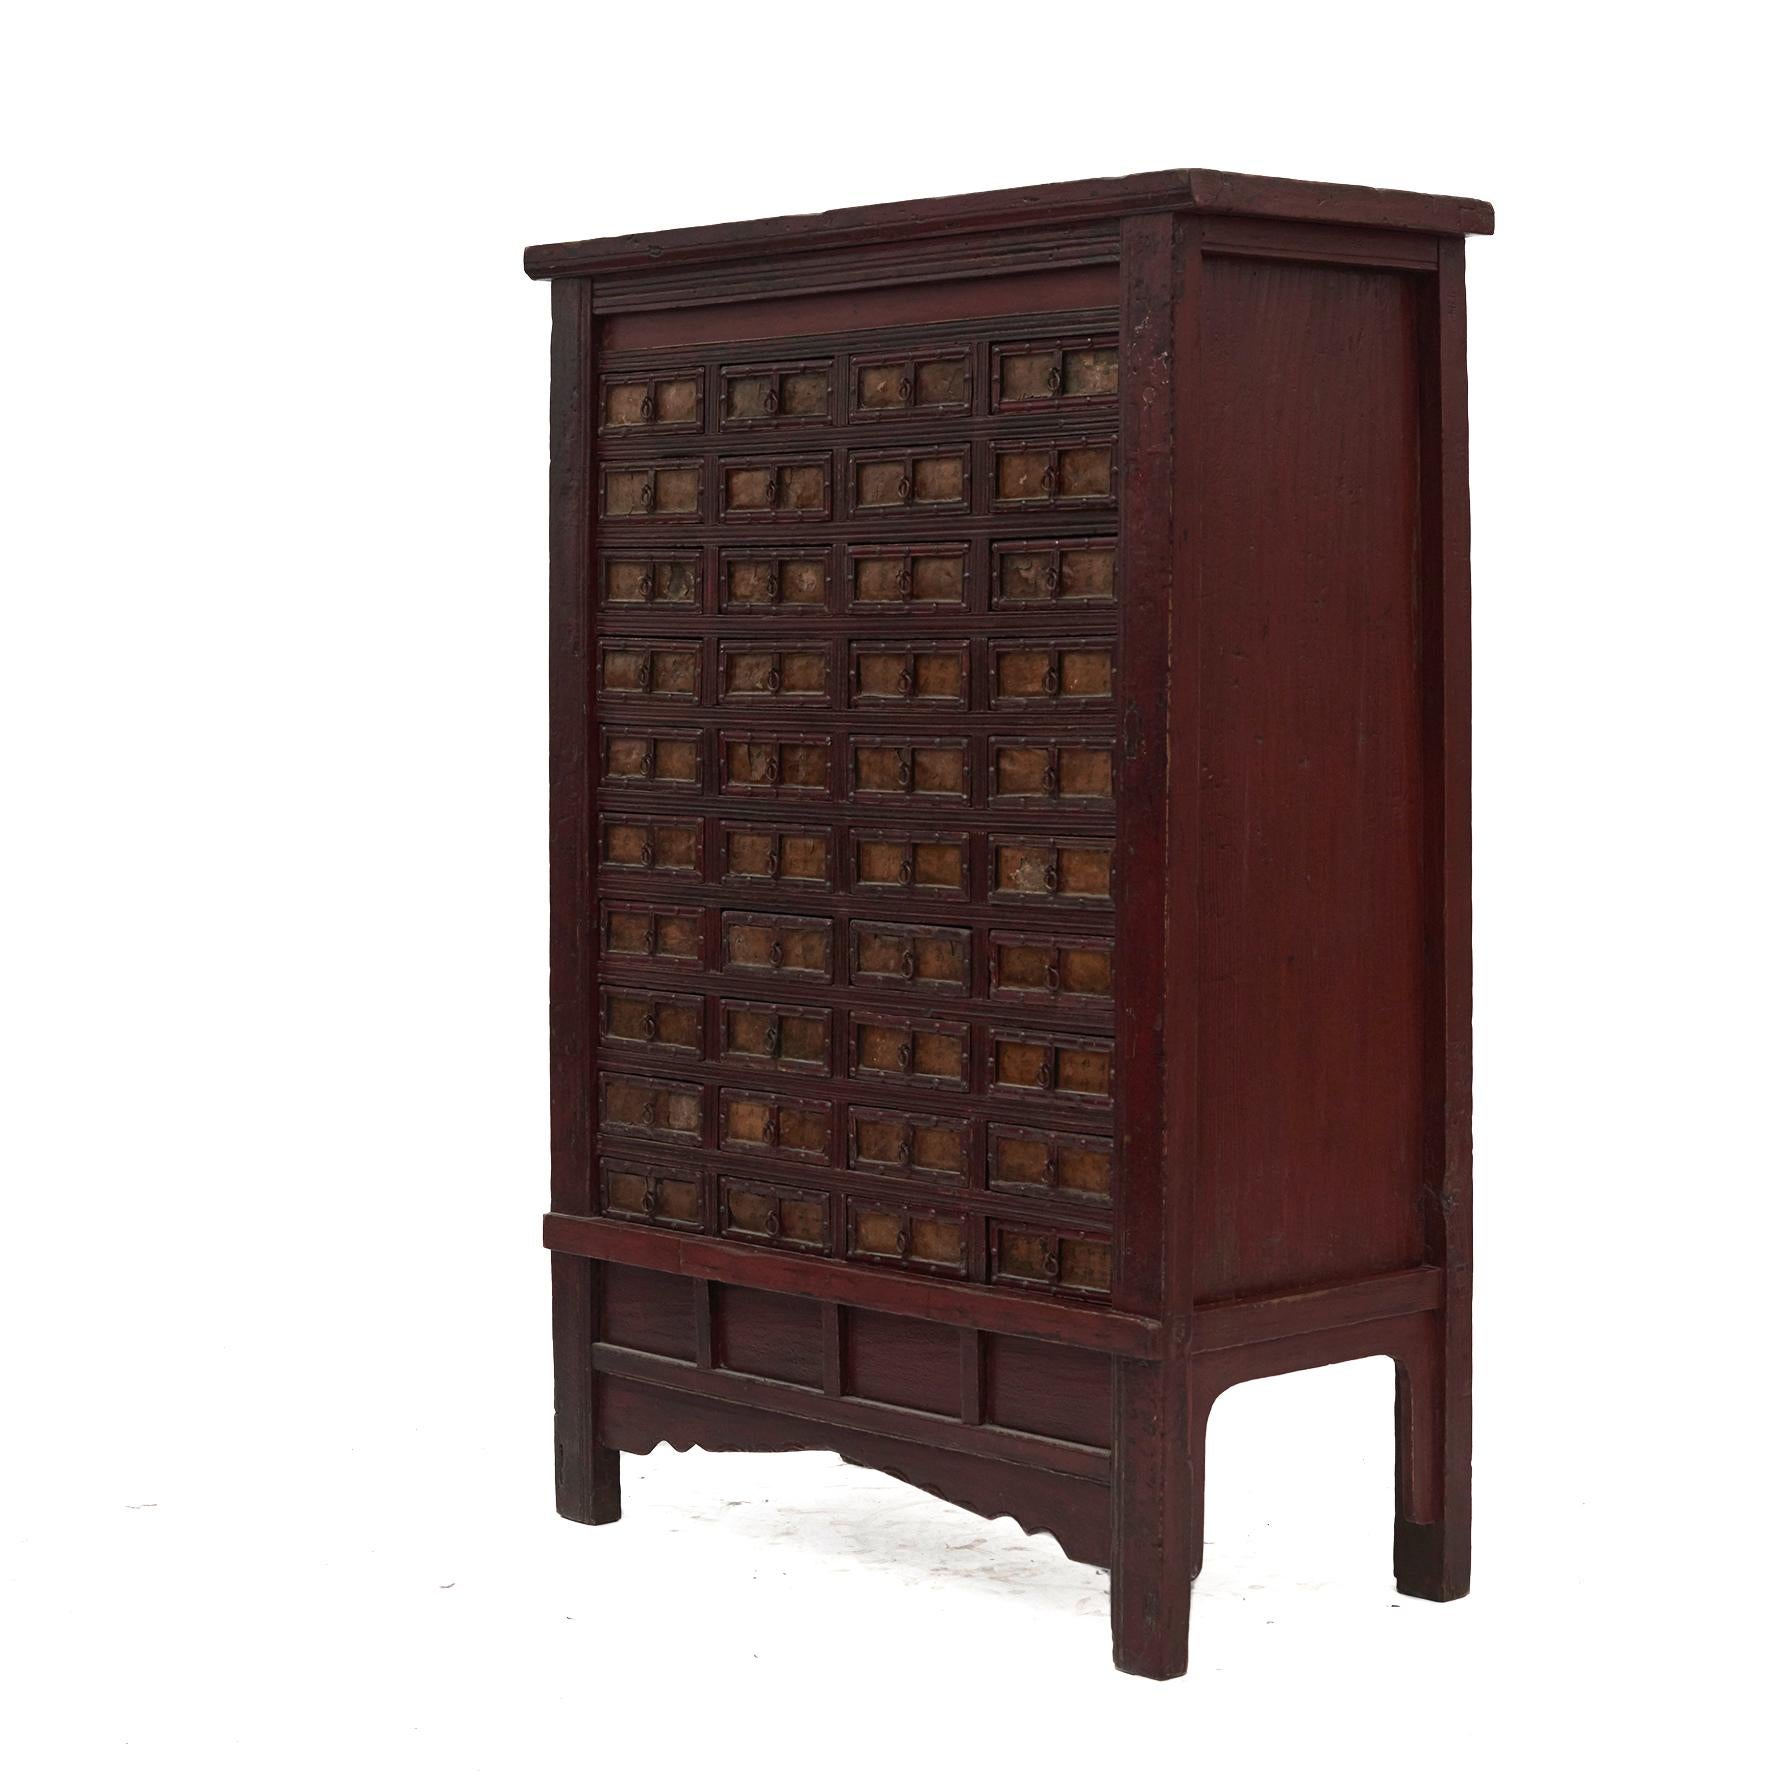 Medicine chest in original red lacquer with 40 drawers. with Chinese calligraphy in lacquer. 
These were used to store and organise Chinese herbs and the drawers were labeled according to the herbs that were stored inside.
Previously in China, the